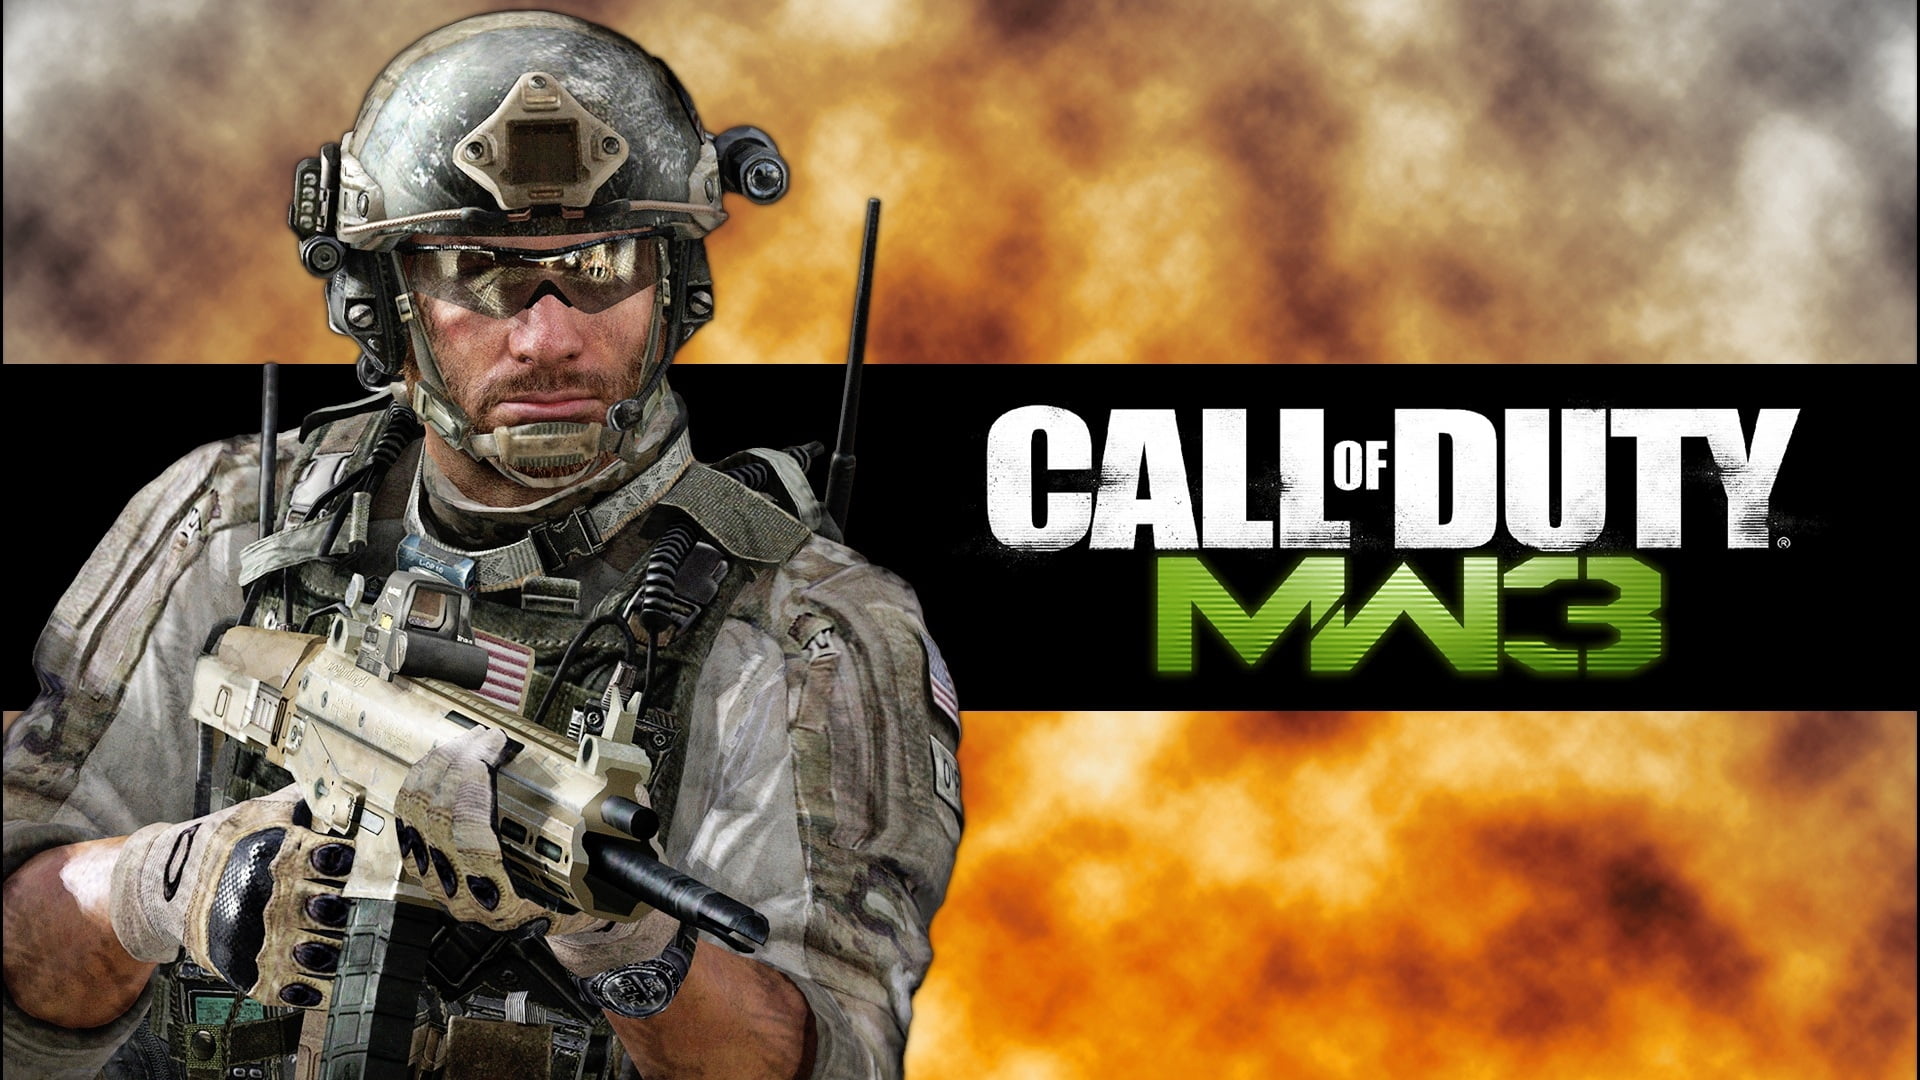 Call of Duty Modern Warfare 3 game cover, soldier, automatic